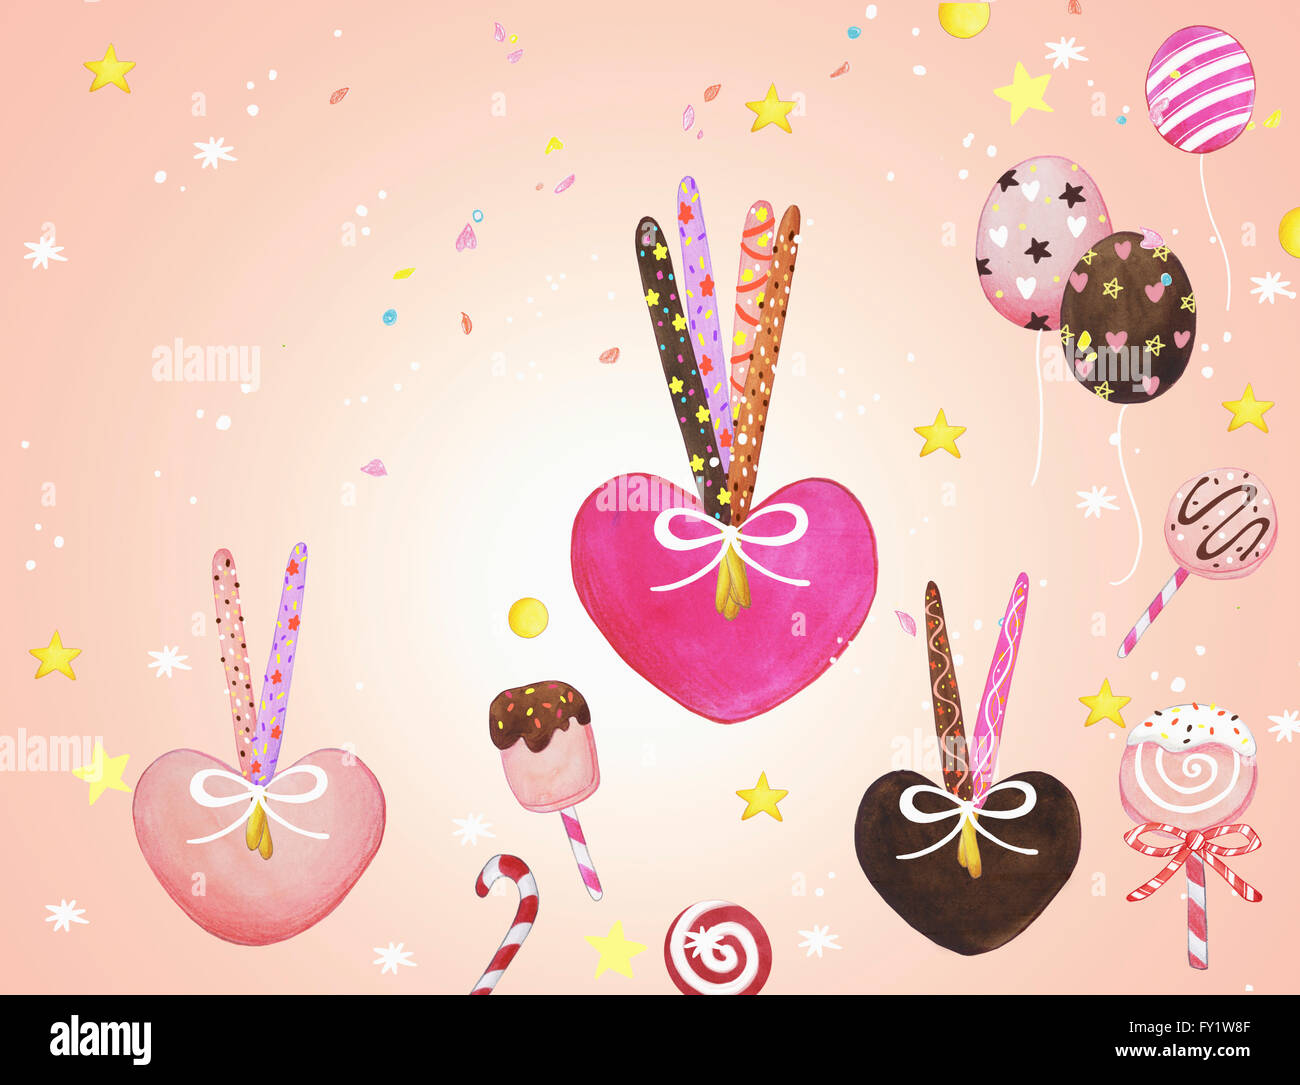 Various illustrated images representing pepero day Stock Photo